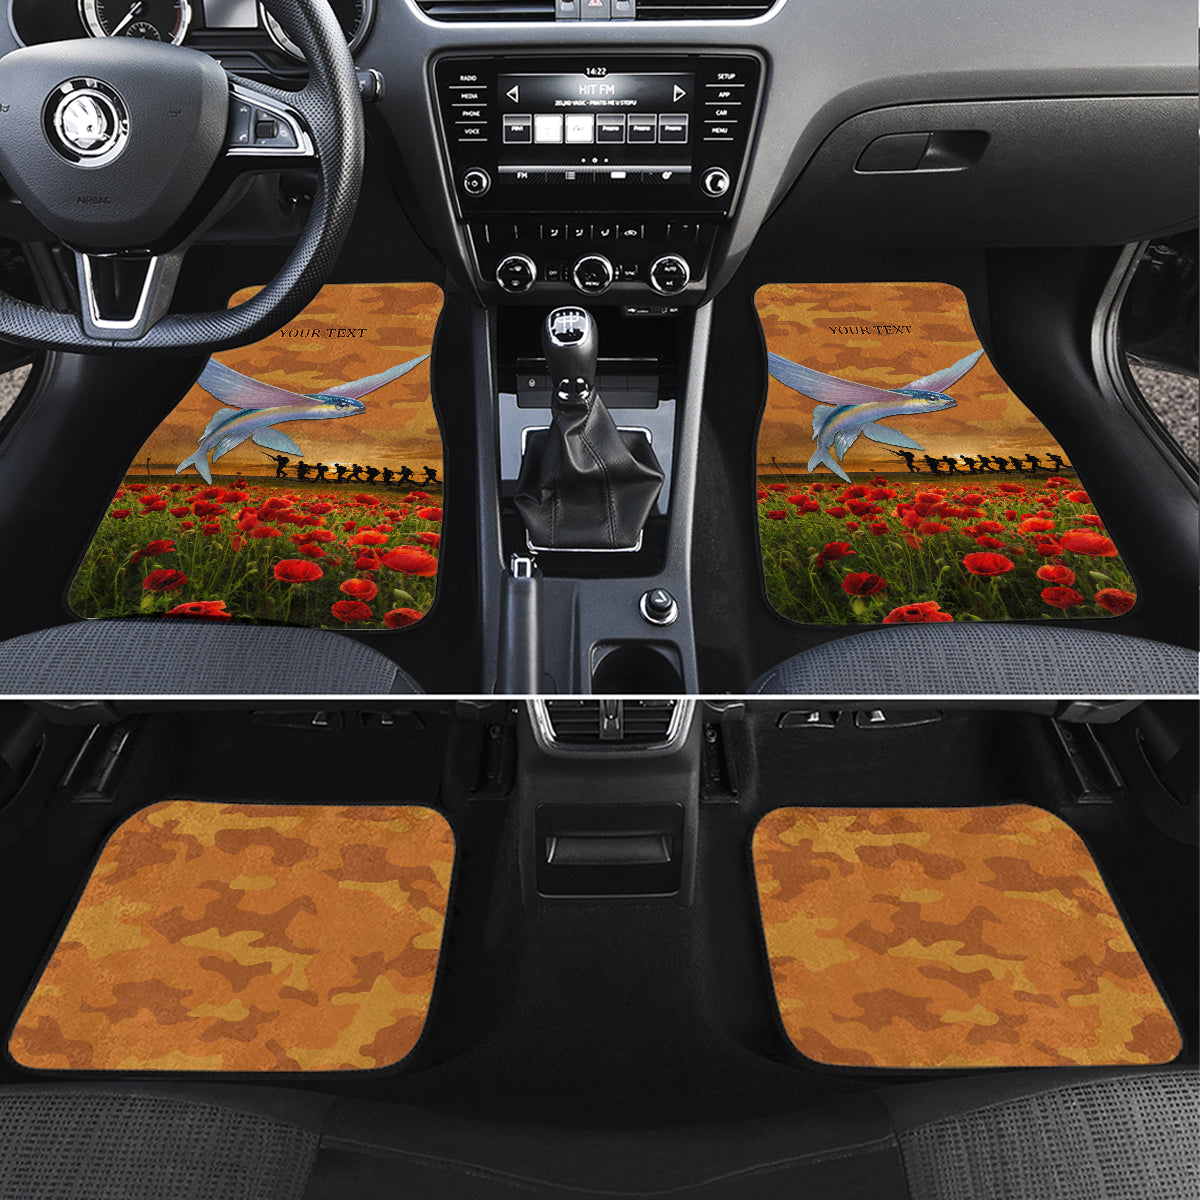 Cook Islands ANZAC Day Personalised Car Mats with Poppy Field LT9 Art - Polynesian Pride